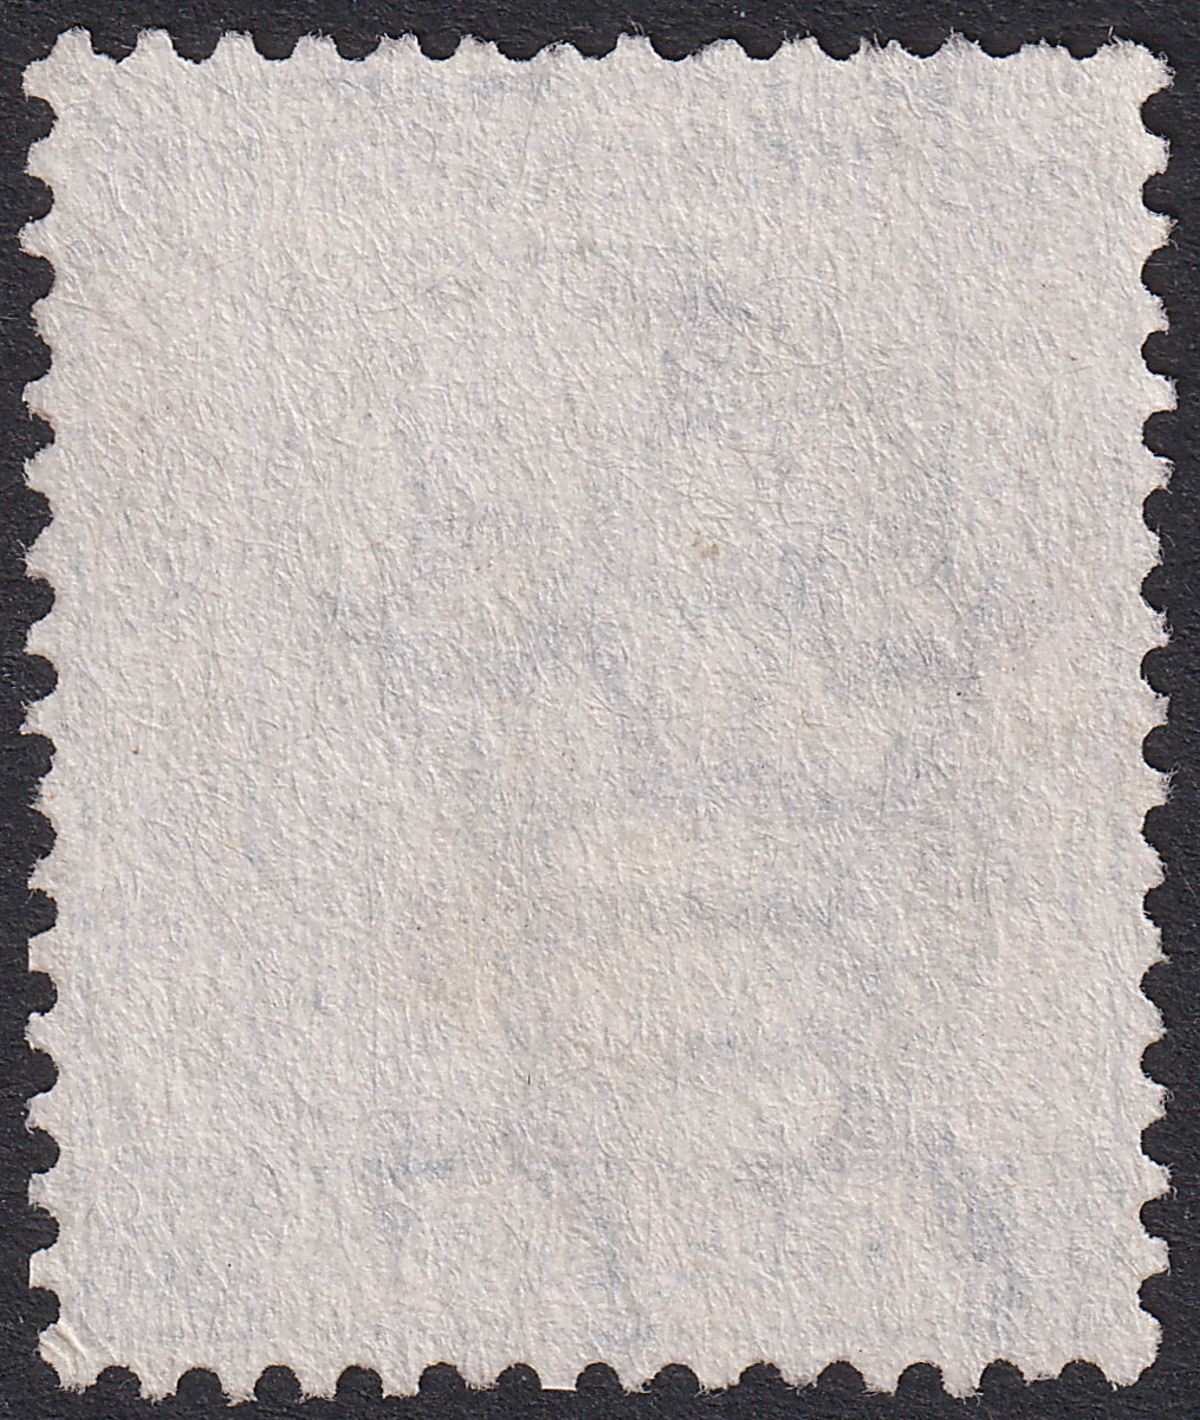 Hong Kong 1880 QV 5c Blue Used SG29 with Dumb Oval Arrival? Mark